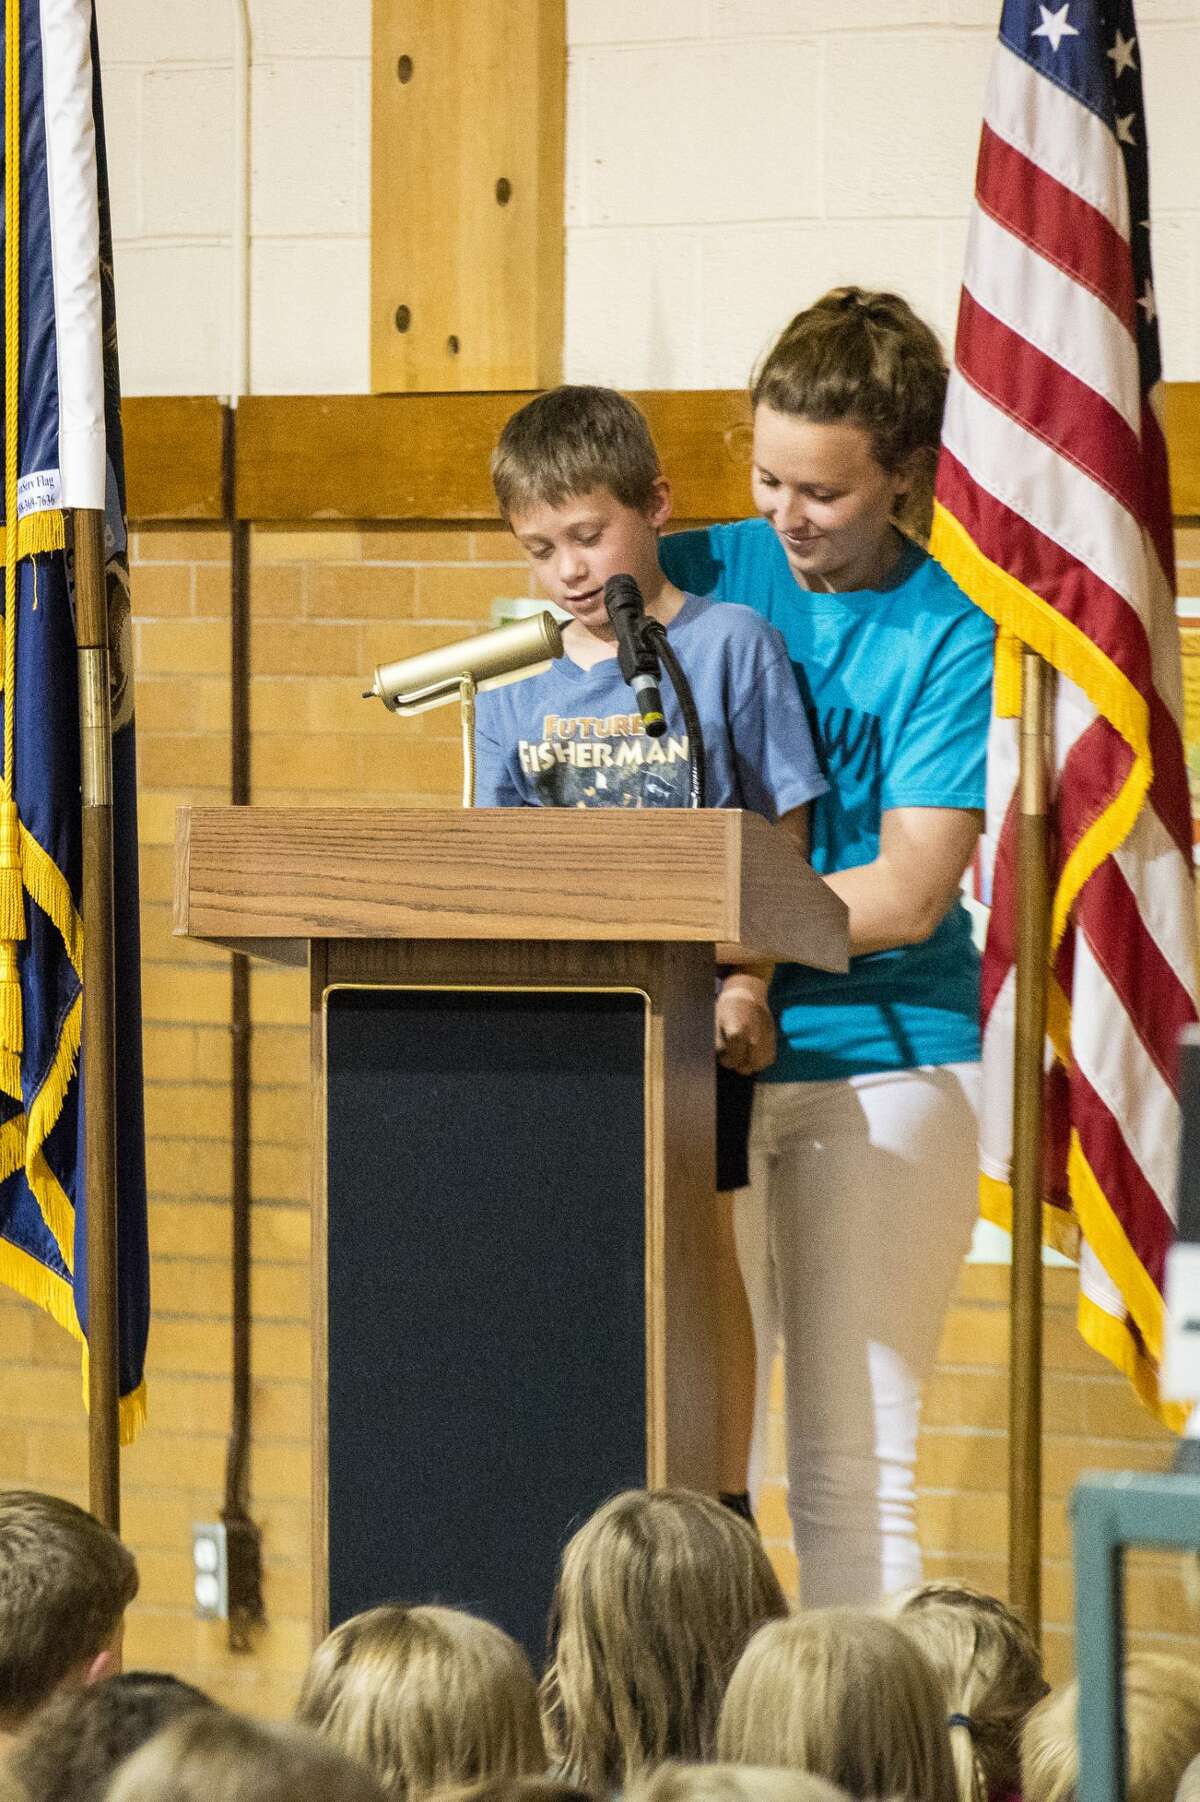 DANIELLE McGREW TENBUSCH | for the Daily News Danny Wontorcik reads a tribute he wrote about Eastlawn Elementary as Lindy Coon gives him a boost during a farewell party at Eastlawn Elementary School in Midland. Starting with the 2017-18 school year, Eastlawn and Carpenter Street elementary schools will combine under the roof of the new Central Park Elementary School, which will have a STEM focus.